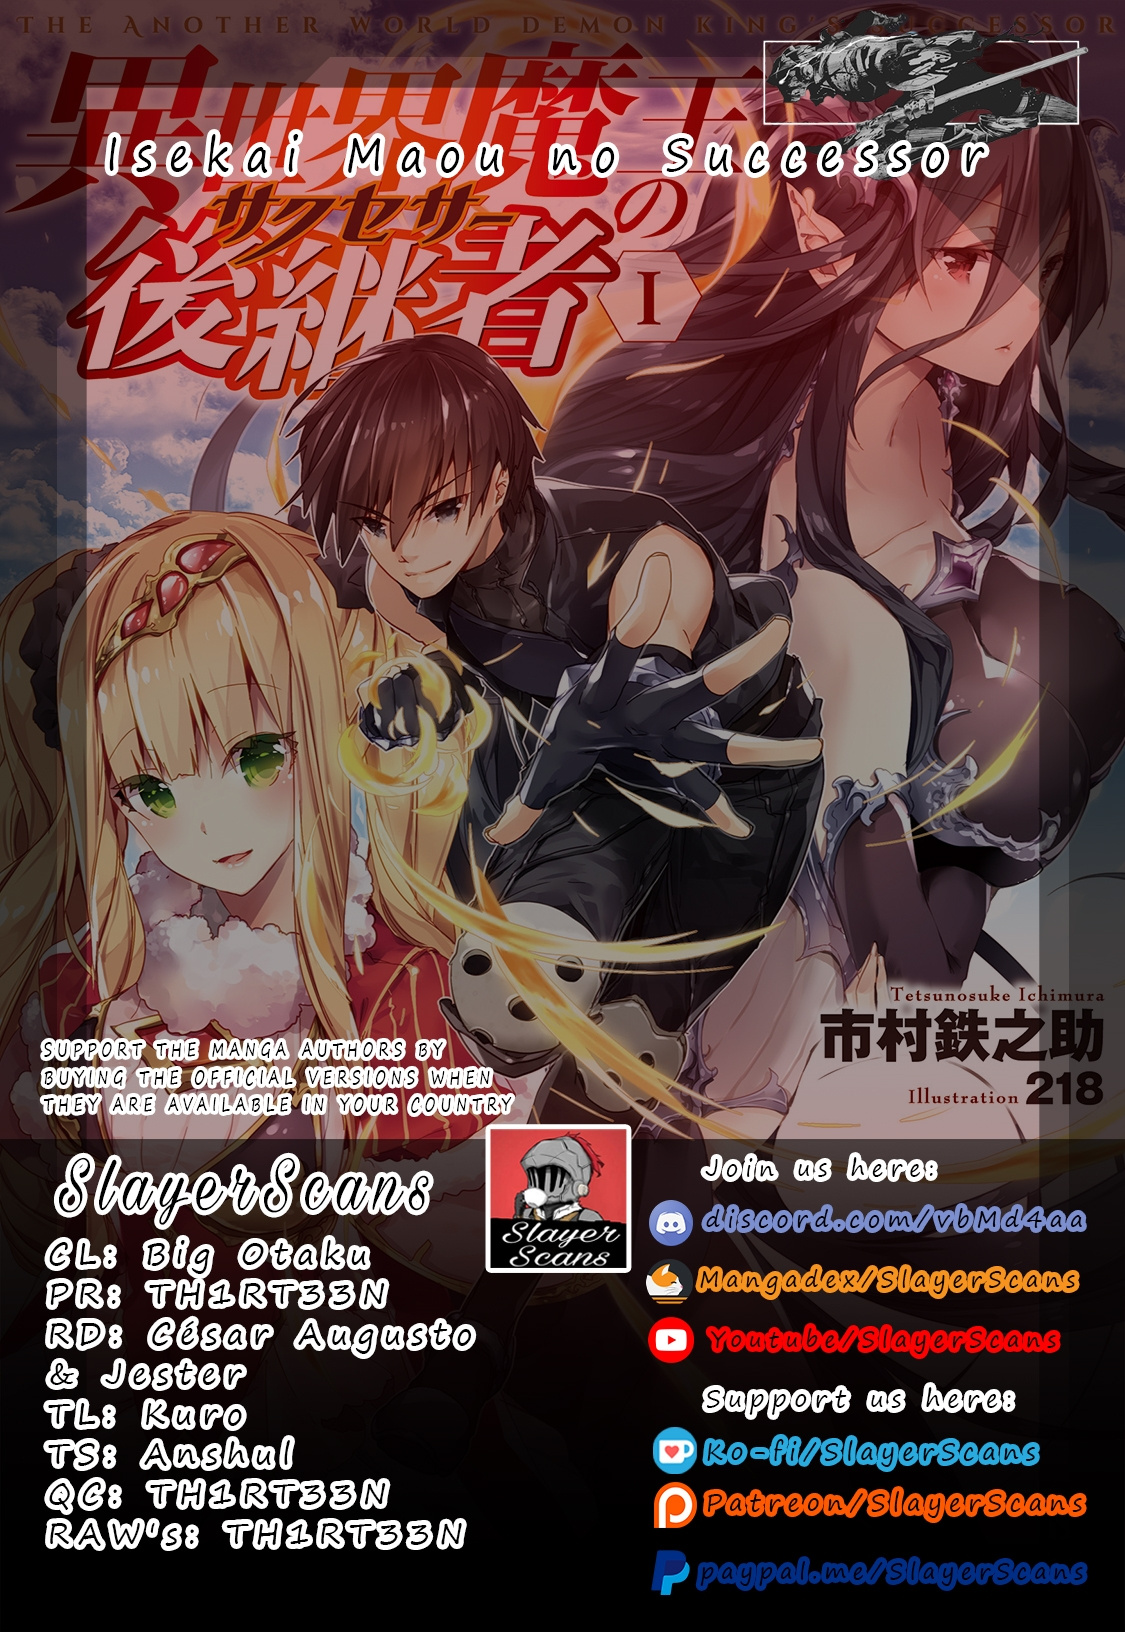 The Another World Demon King's Successor Chapter 1 #1